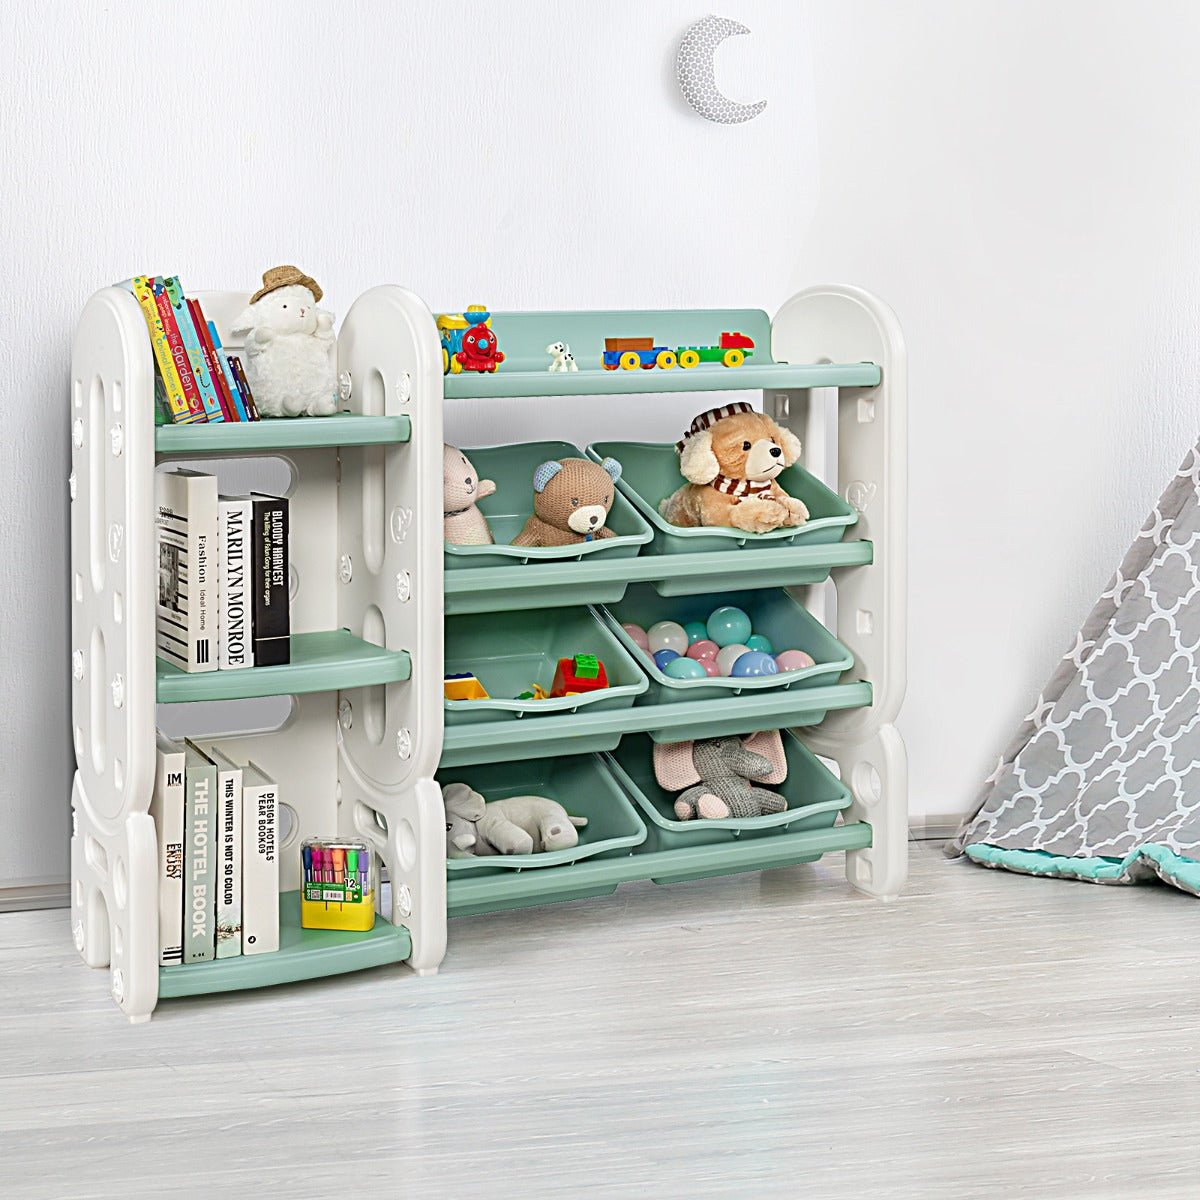 Green Toy Storage and Bookshelf for Child's Room - Organized Bliss